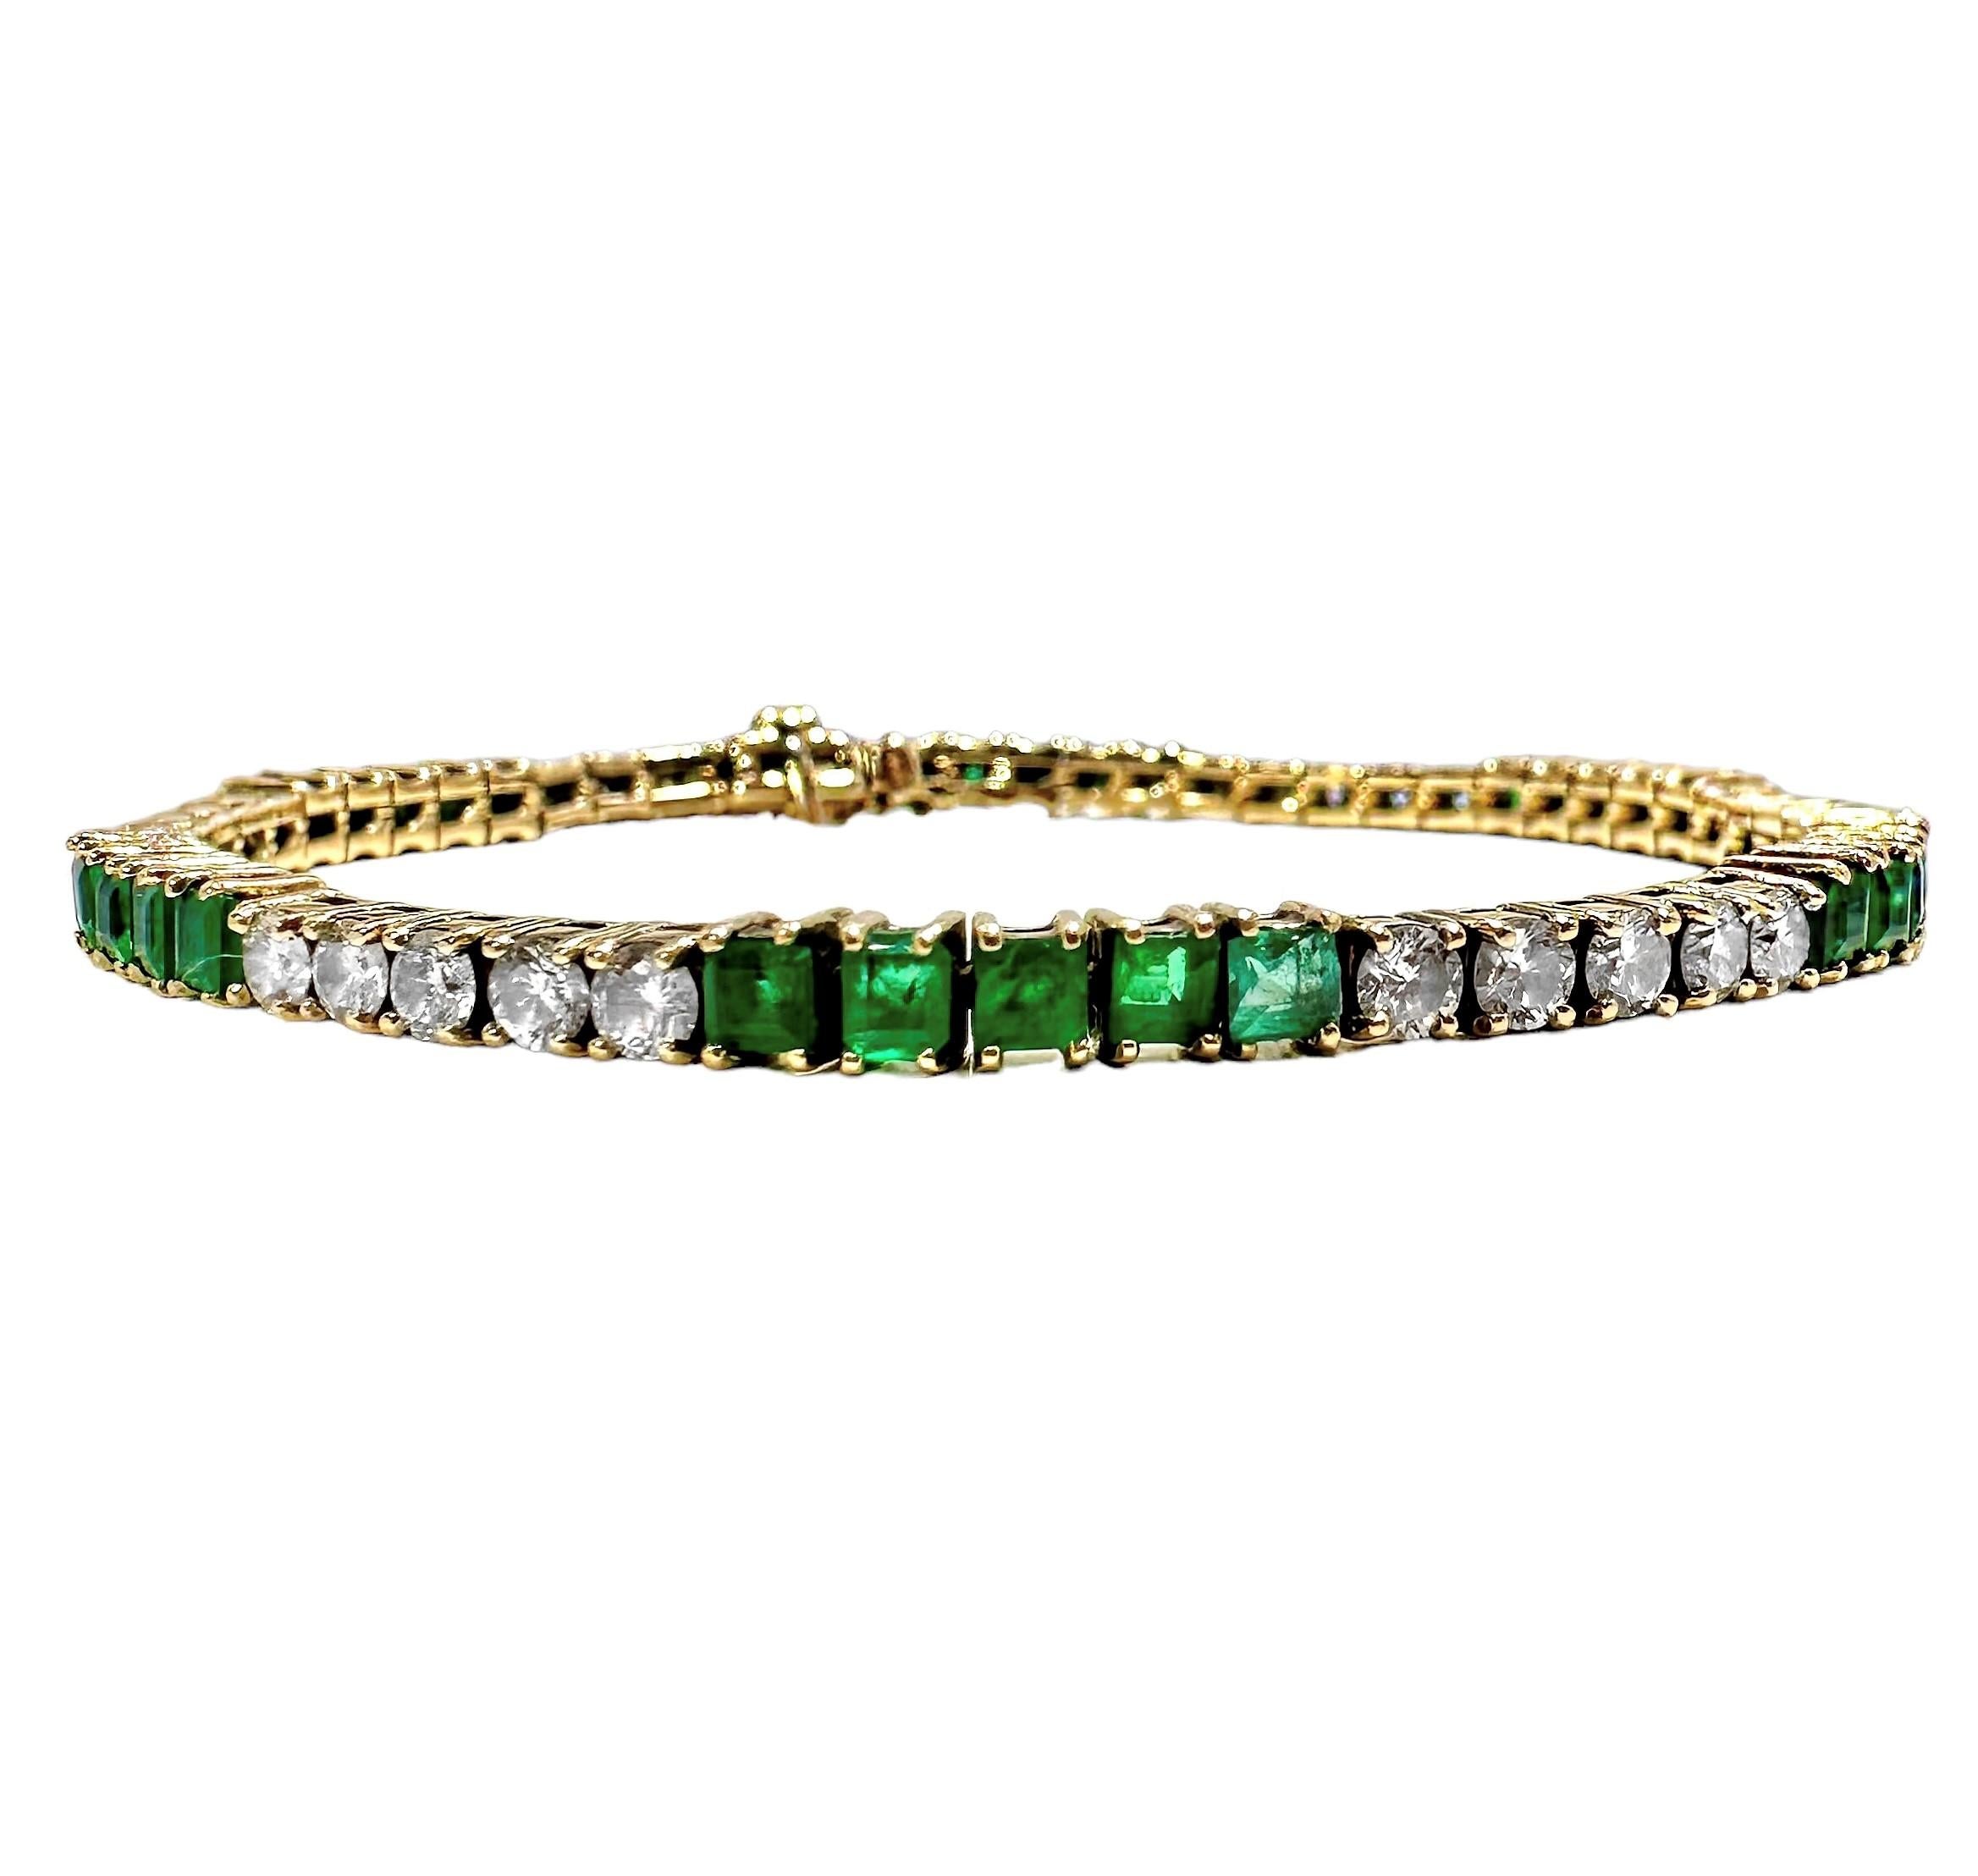 This delicate Mid-20th Century French Tennis Bracelet was deftly manufactured in 18K yellow gold, with alternating 5 stone sections of brilliant cut diamonds and bright green emeralds. The 30 diamonds have a total approximate weight of 1.80ct and an